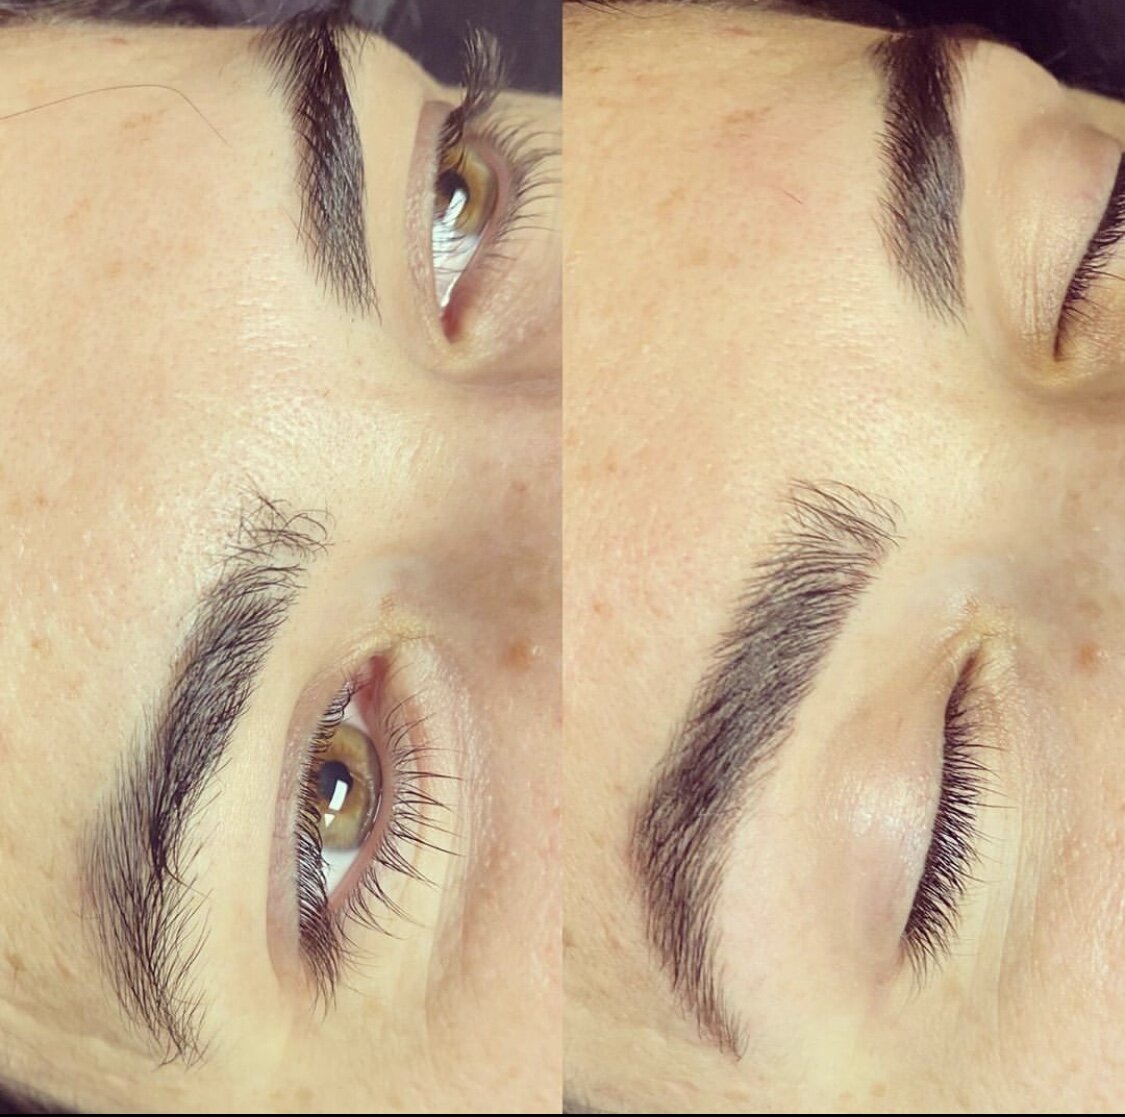 Please Enjoy My Brow Lamination Before and After Photos, Review